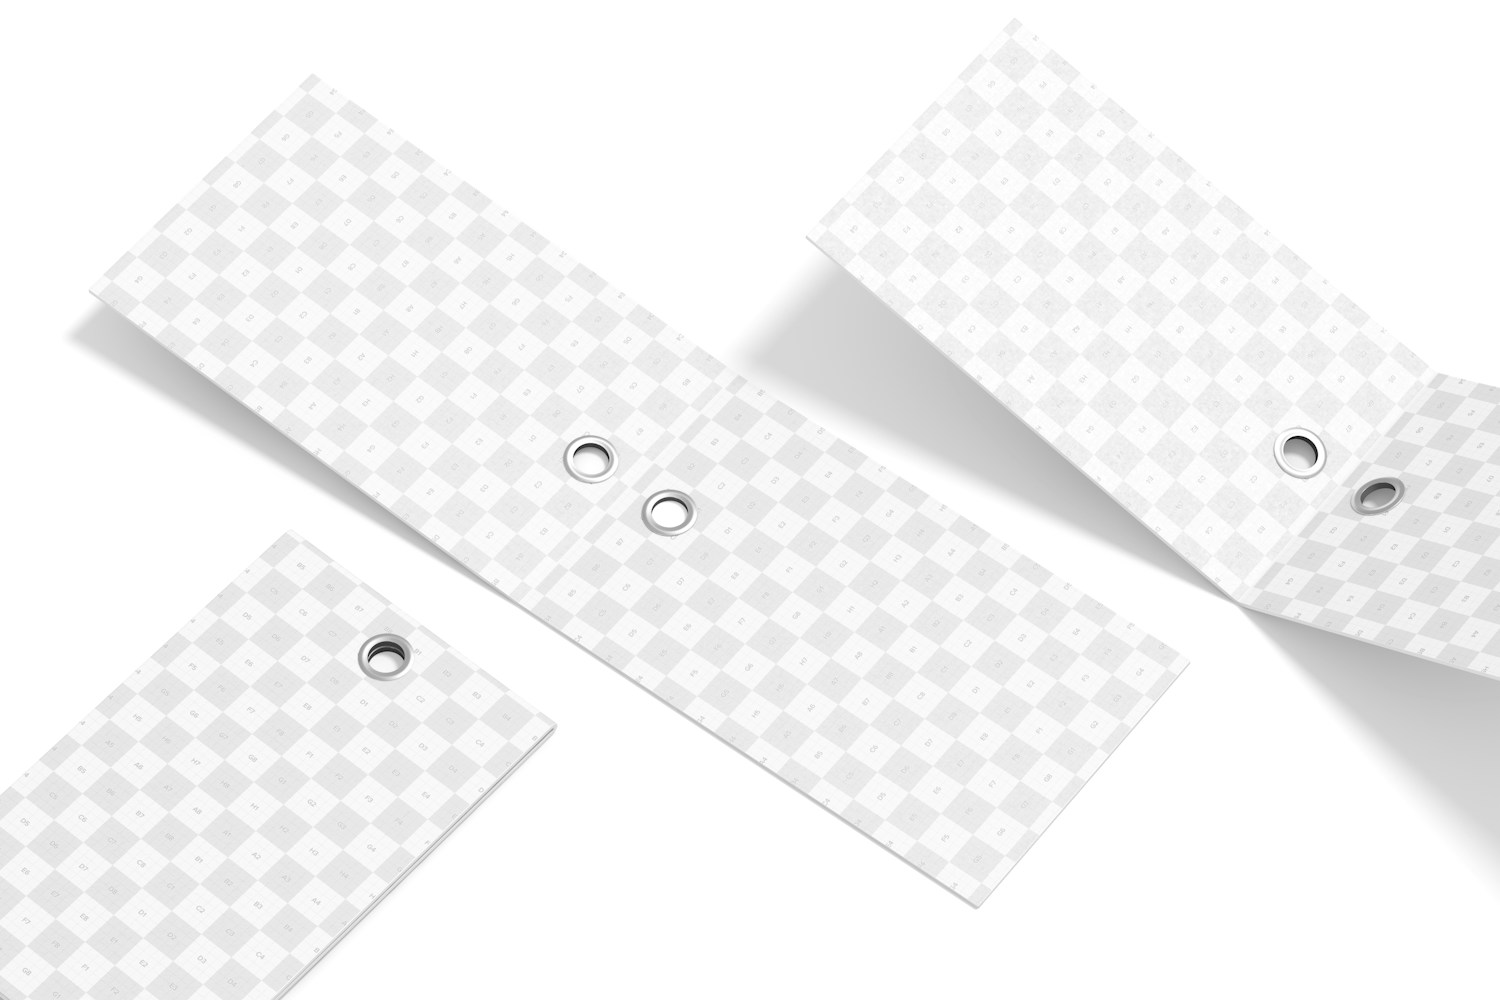 Folding Clothing Tags Mockup, Opened and Closed